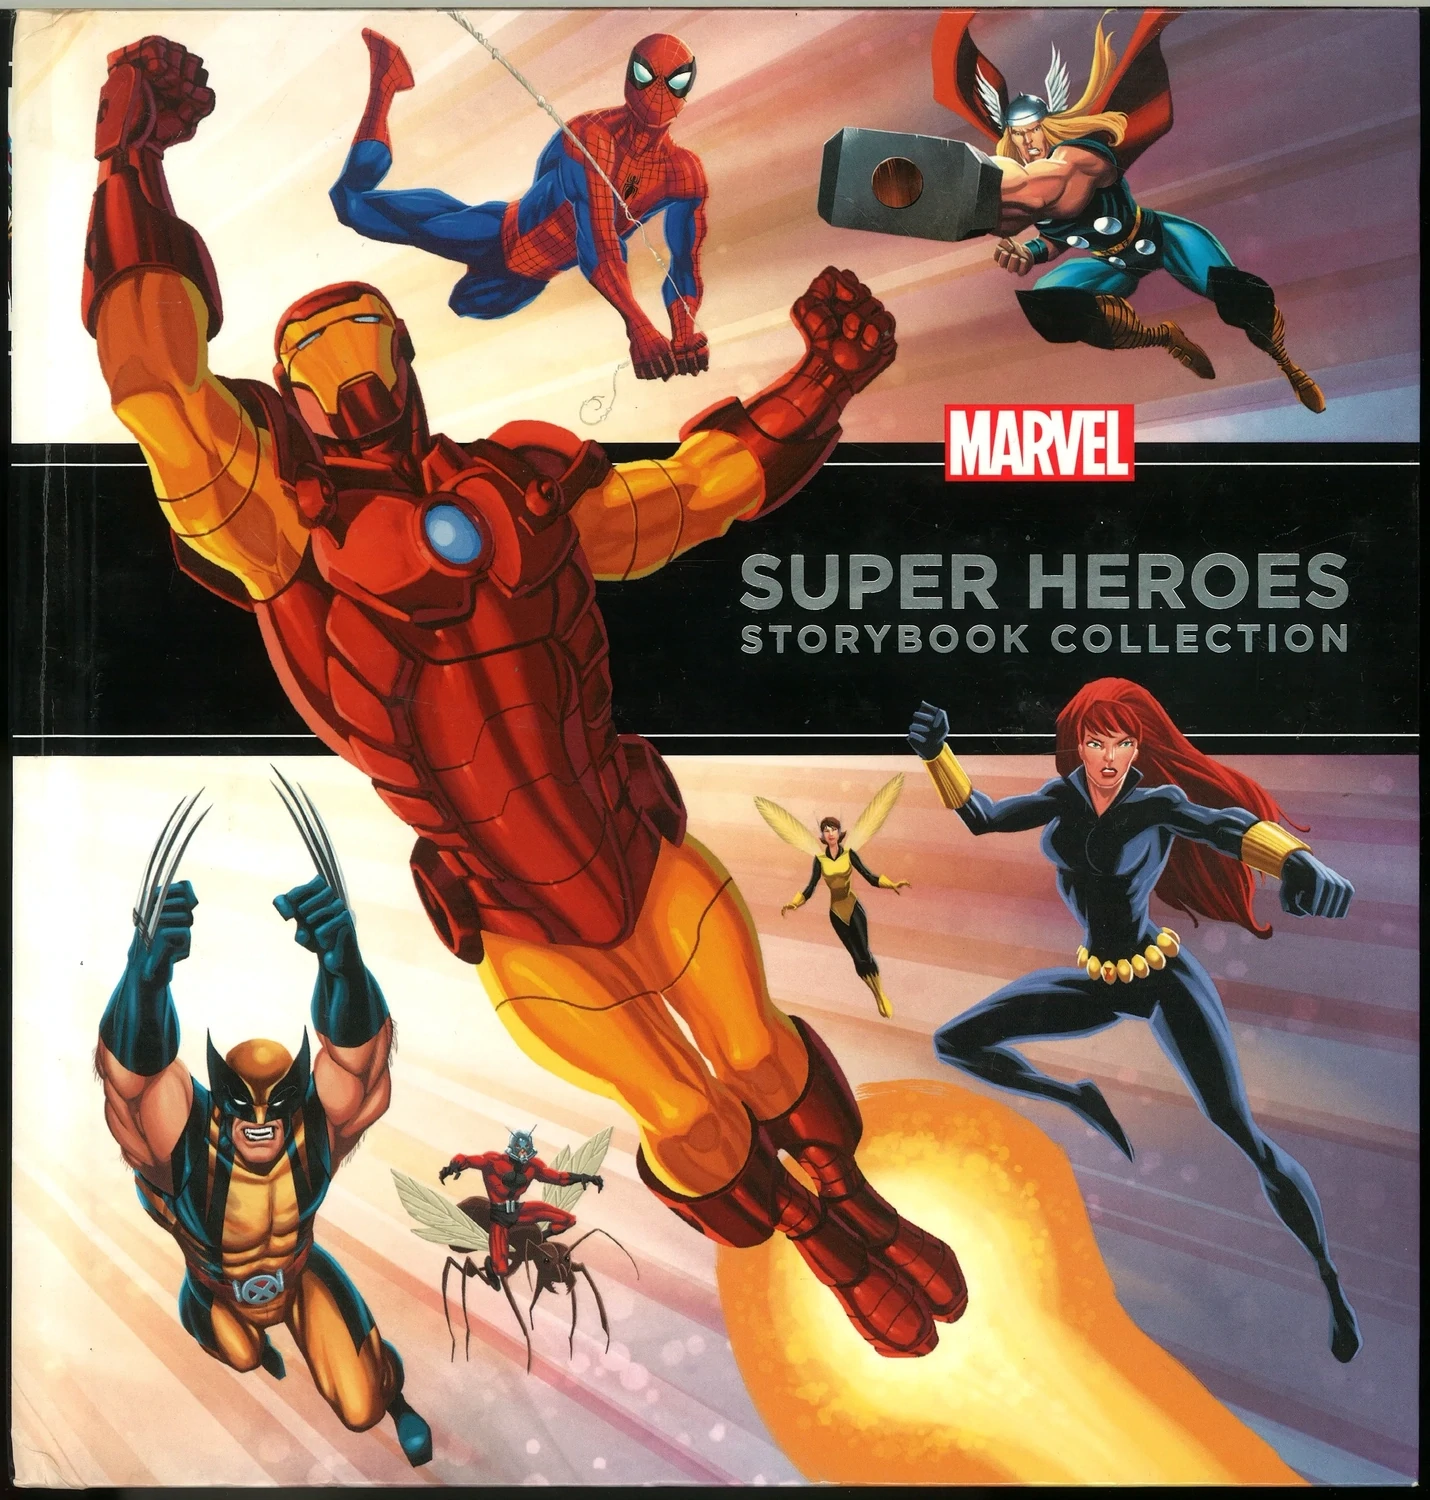 Marvel's Super Heroes Storybook Collection